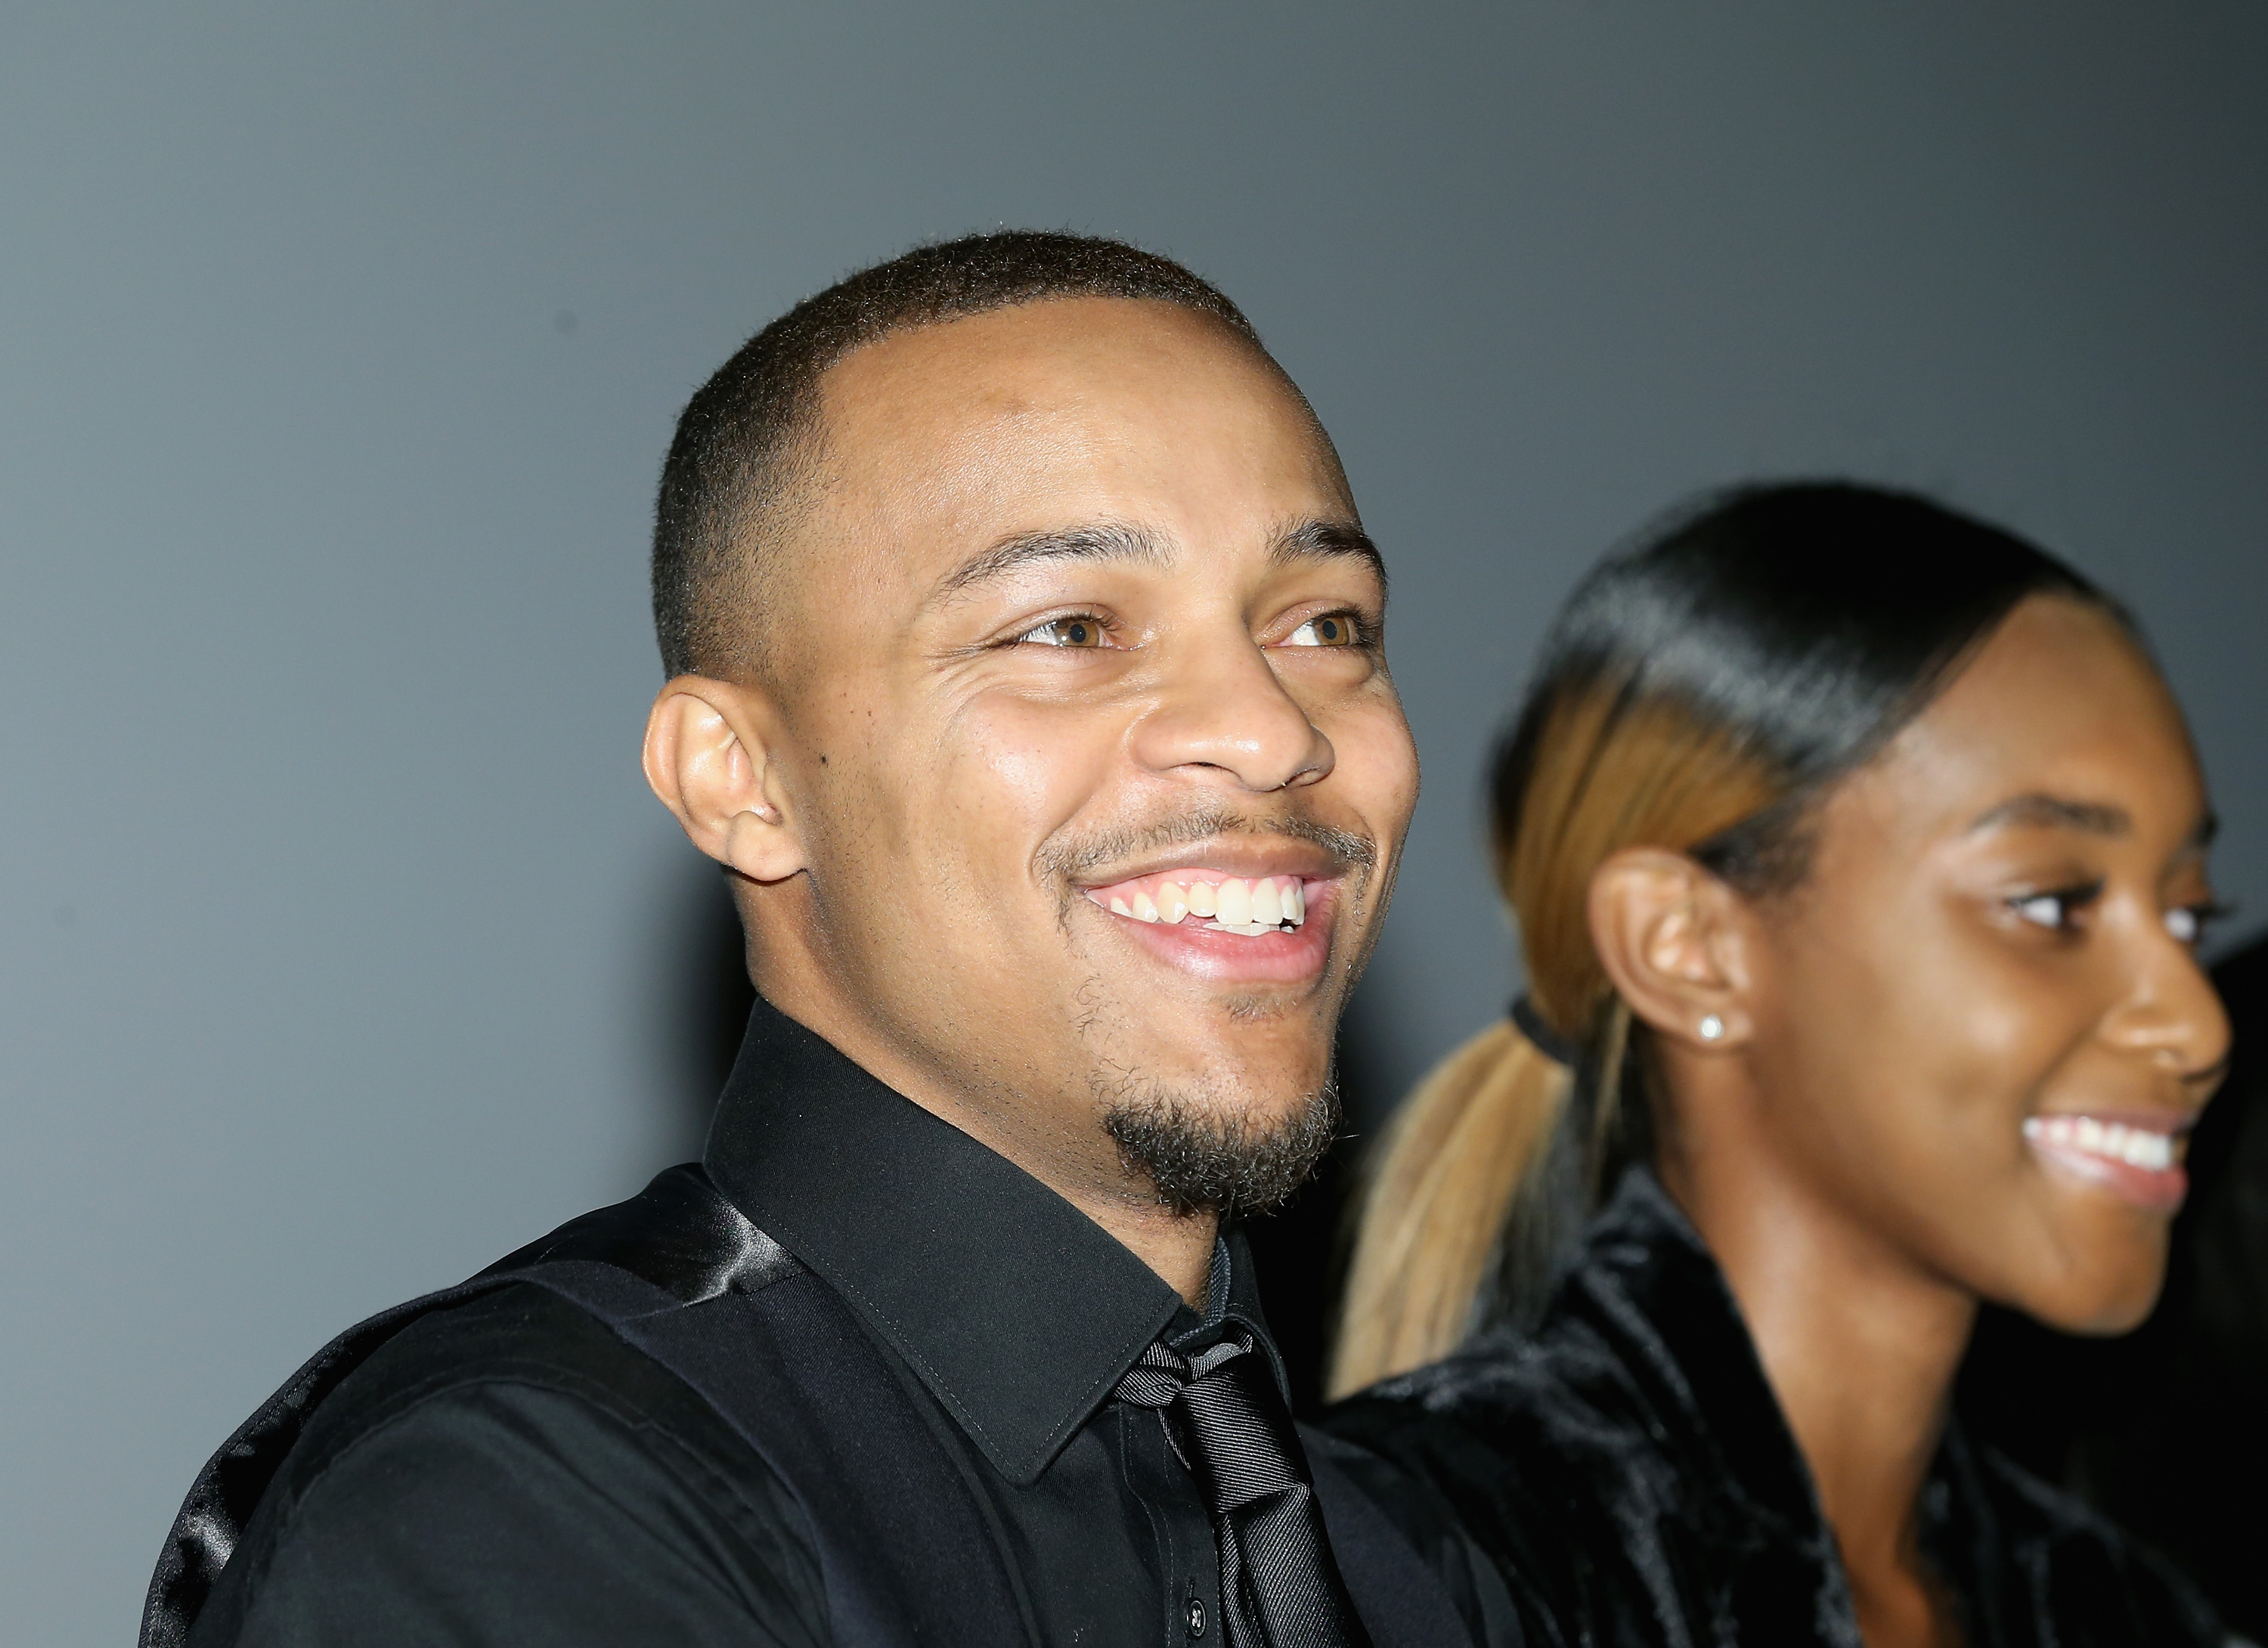 She's Only 10': Bow Wow's Daughter Dancing with Mom Joie Chavis Leaves Fans  Shook